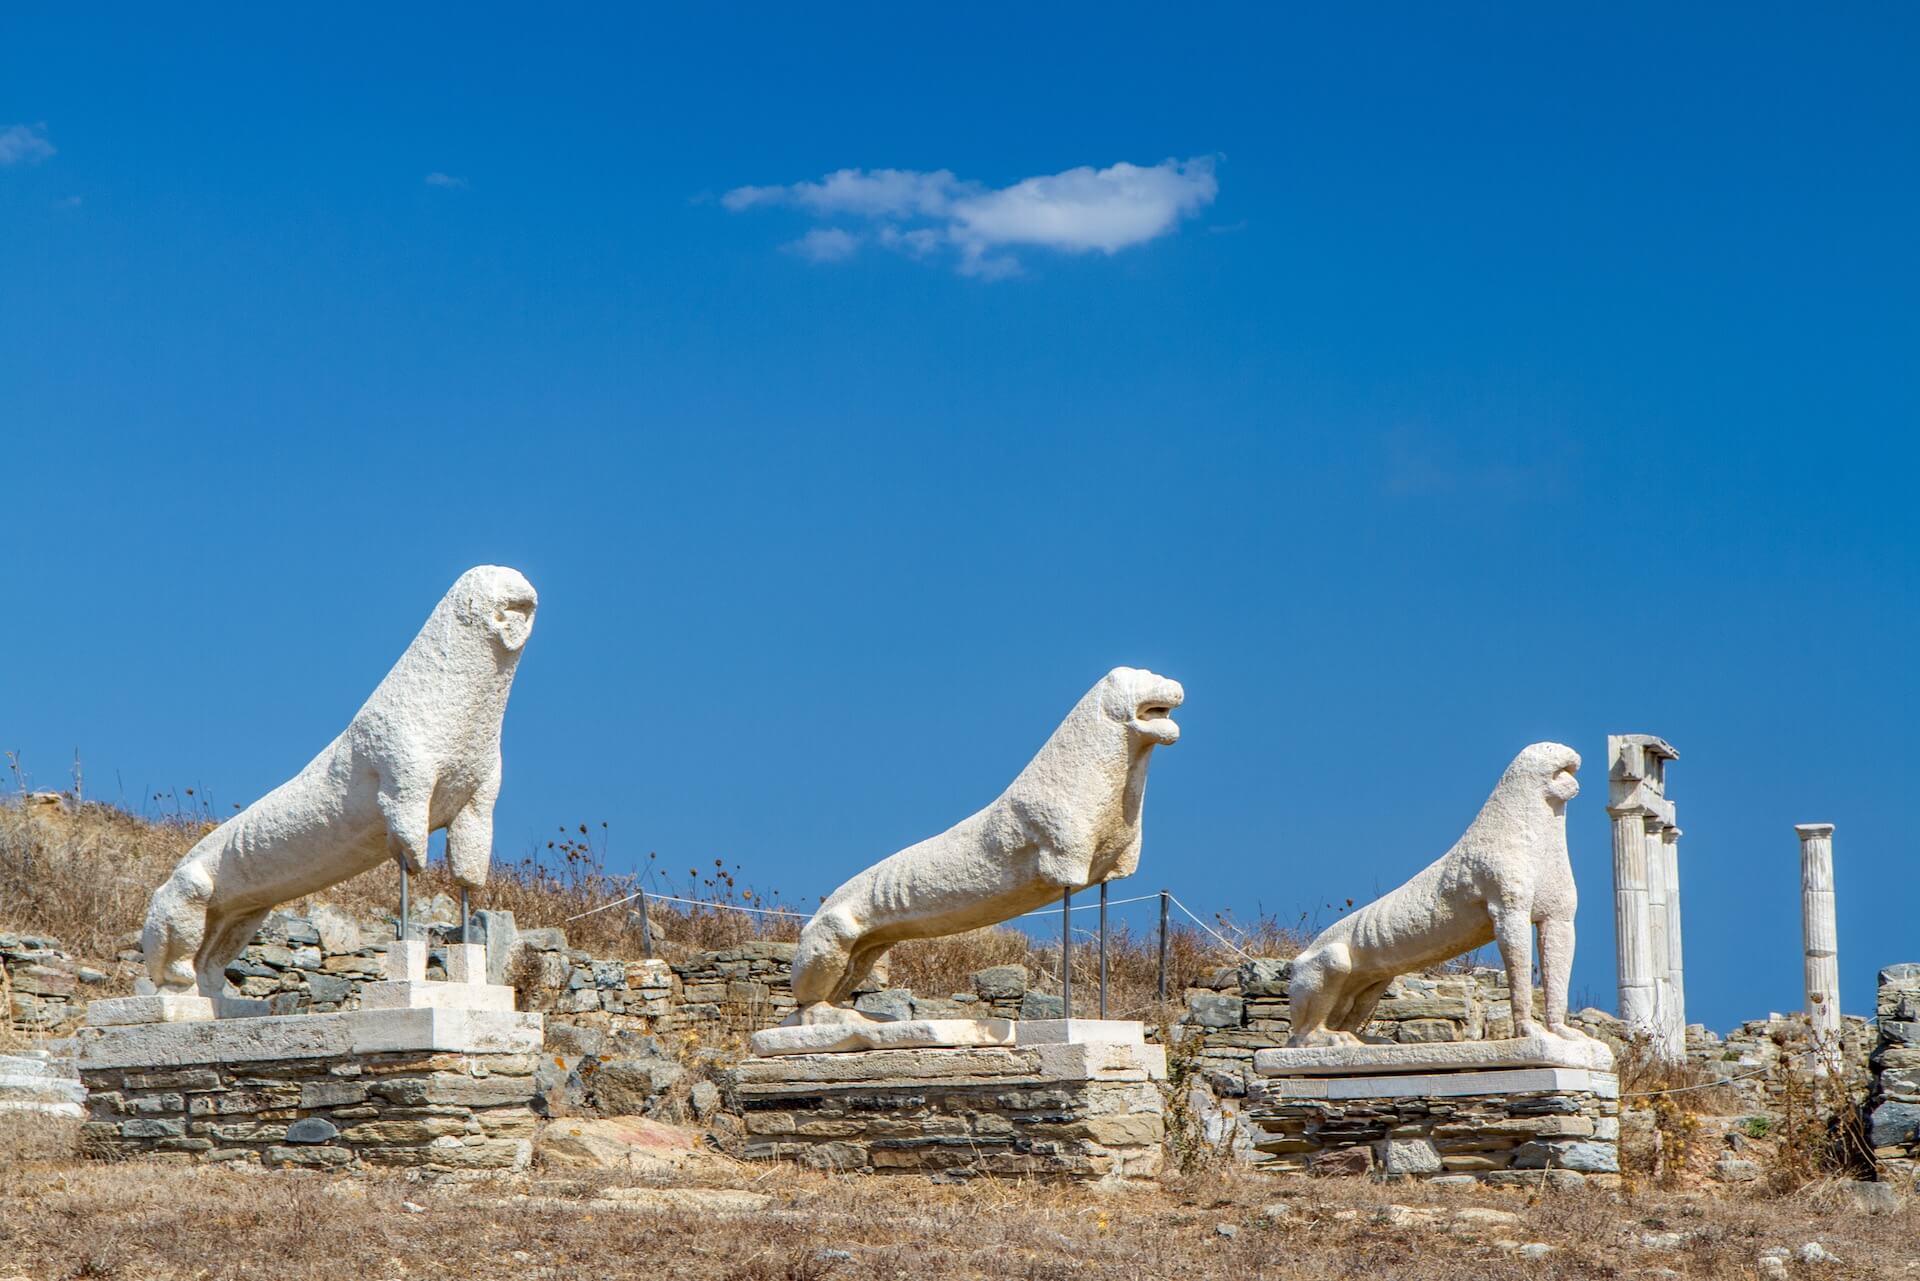 Three distressed lion statues made of stone standing next to each other